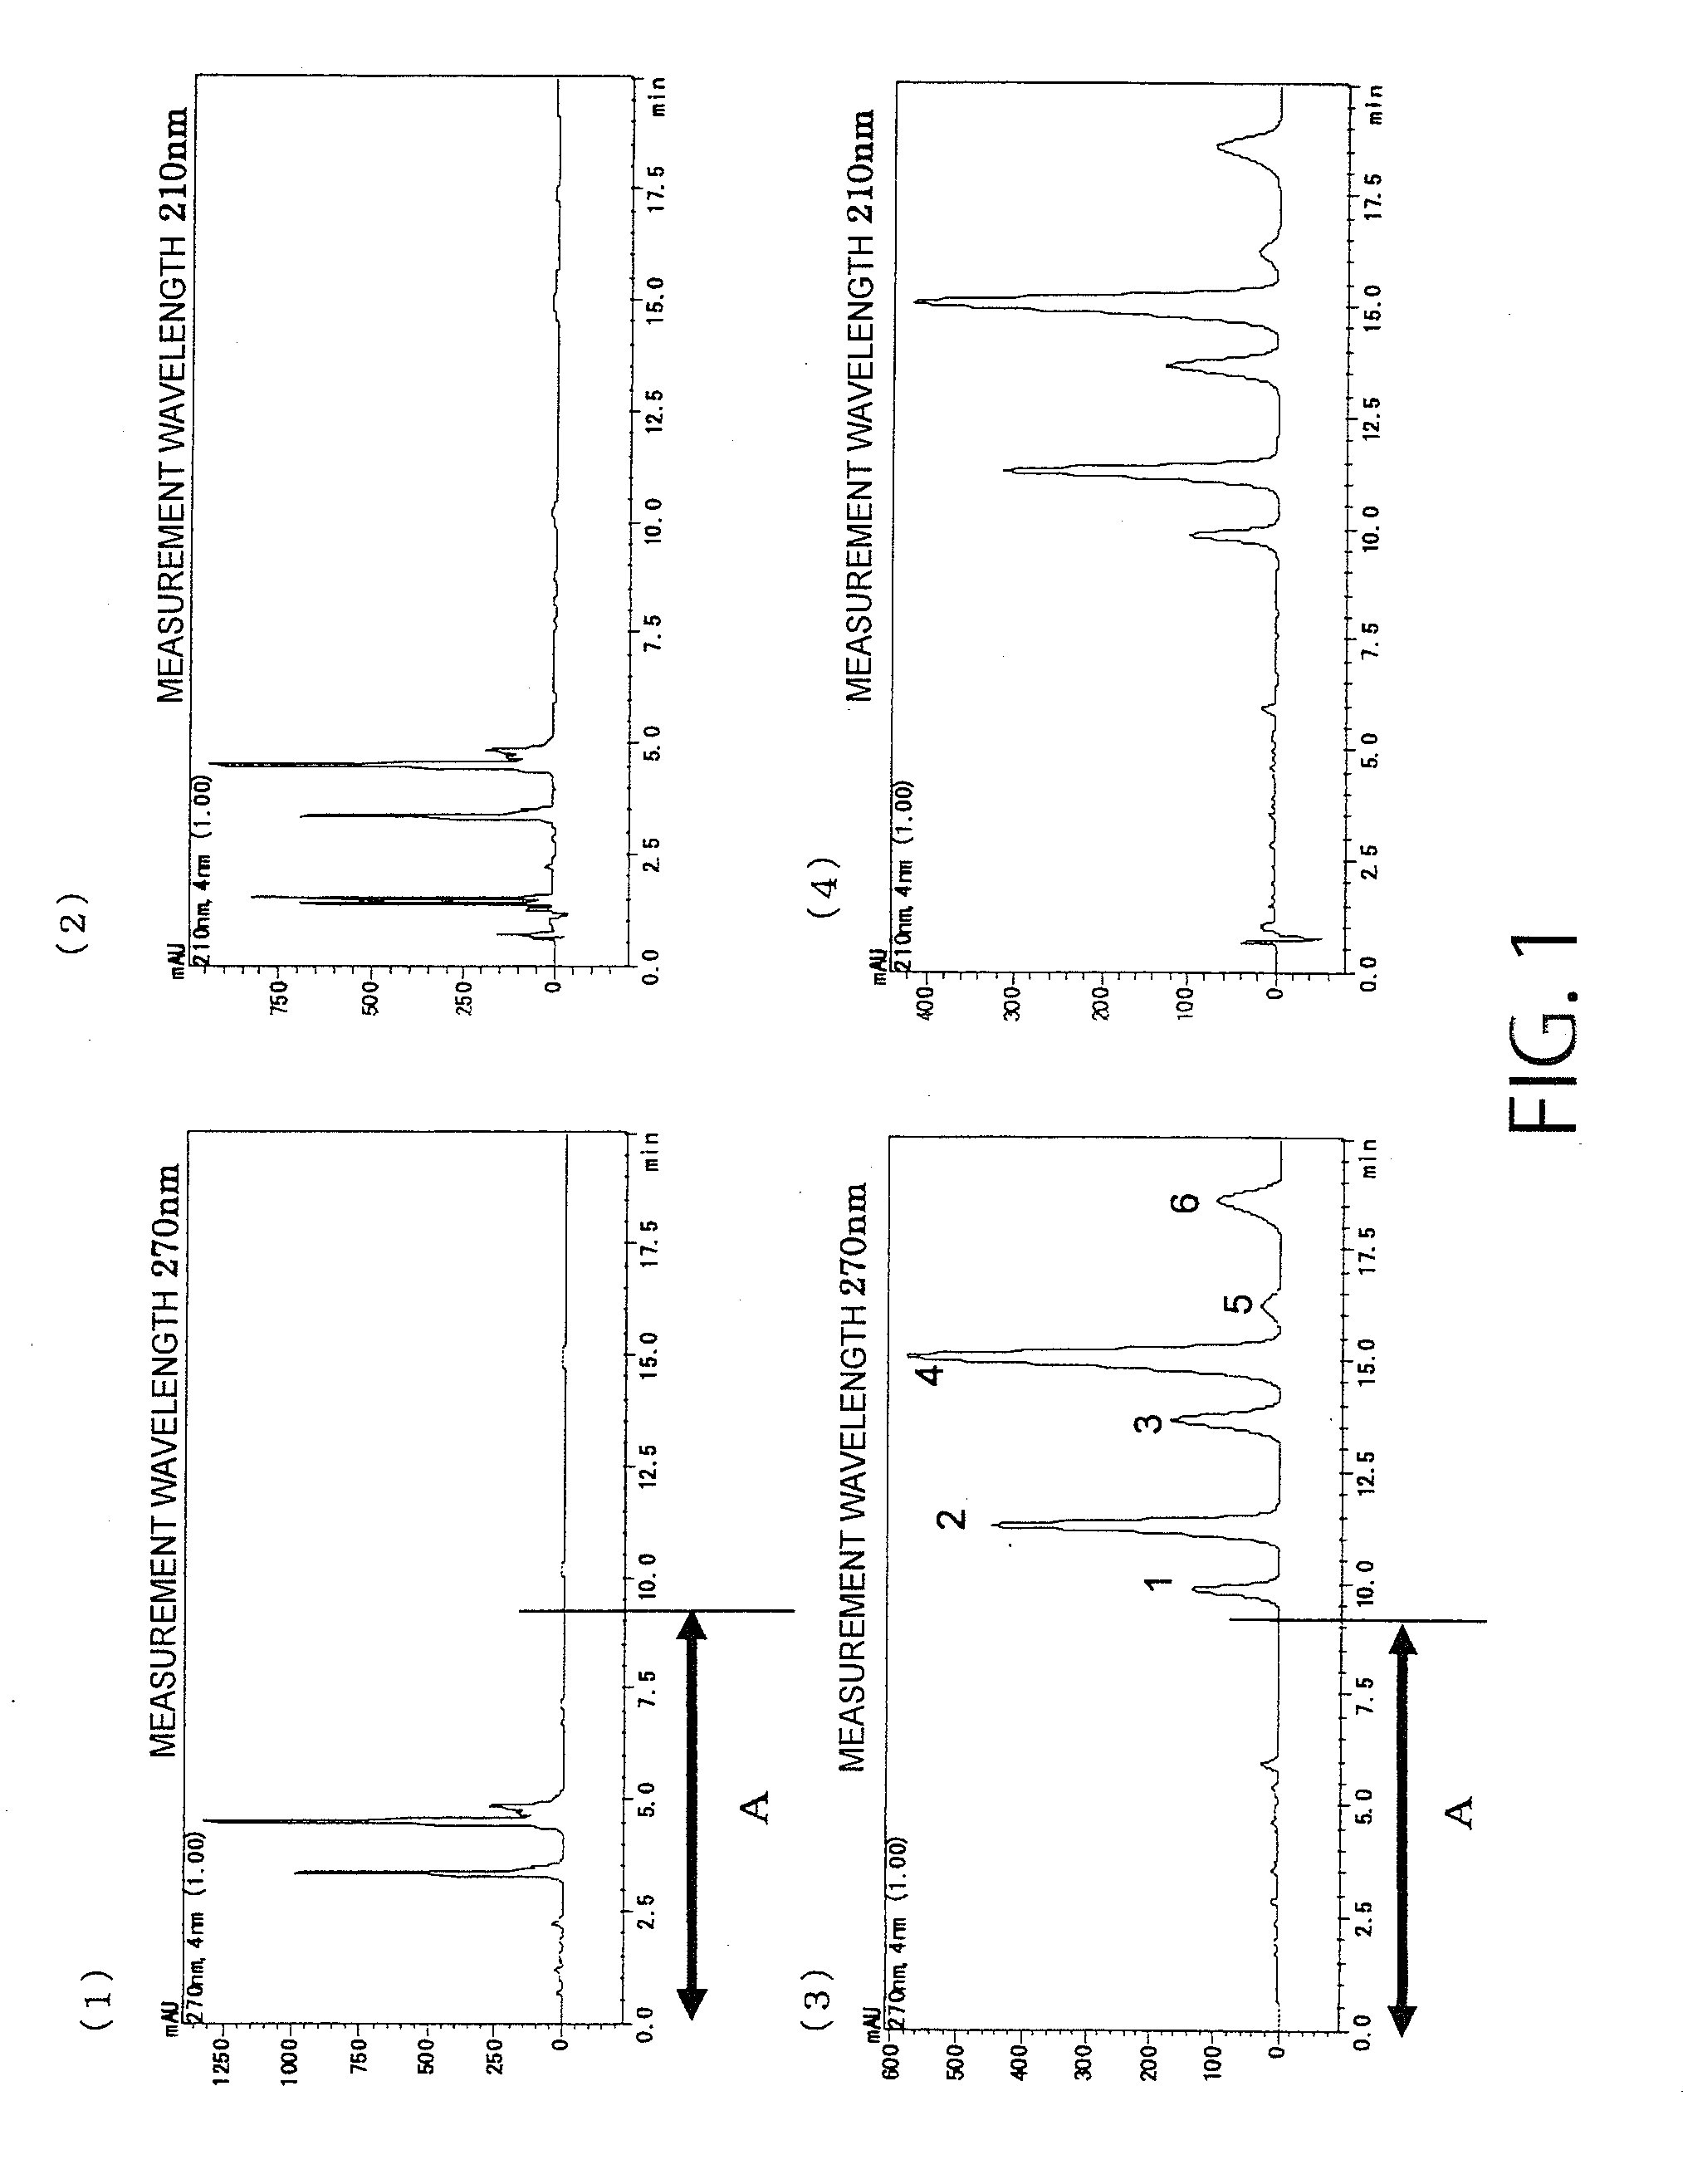 Alkaline decomposition product of hop extract and use thereof